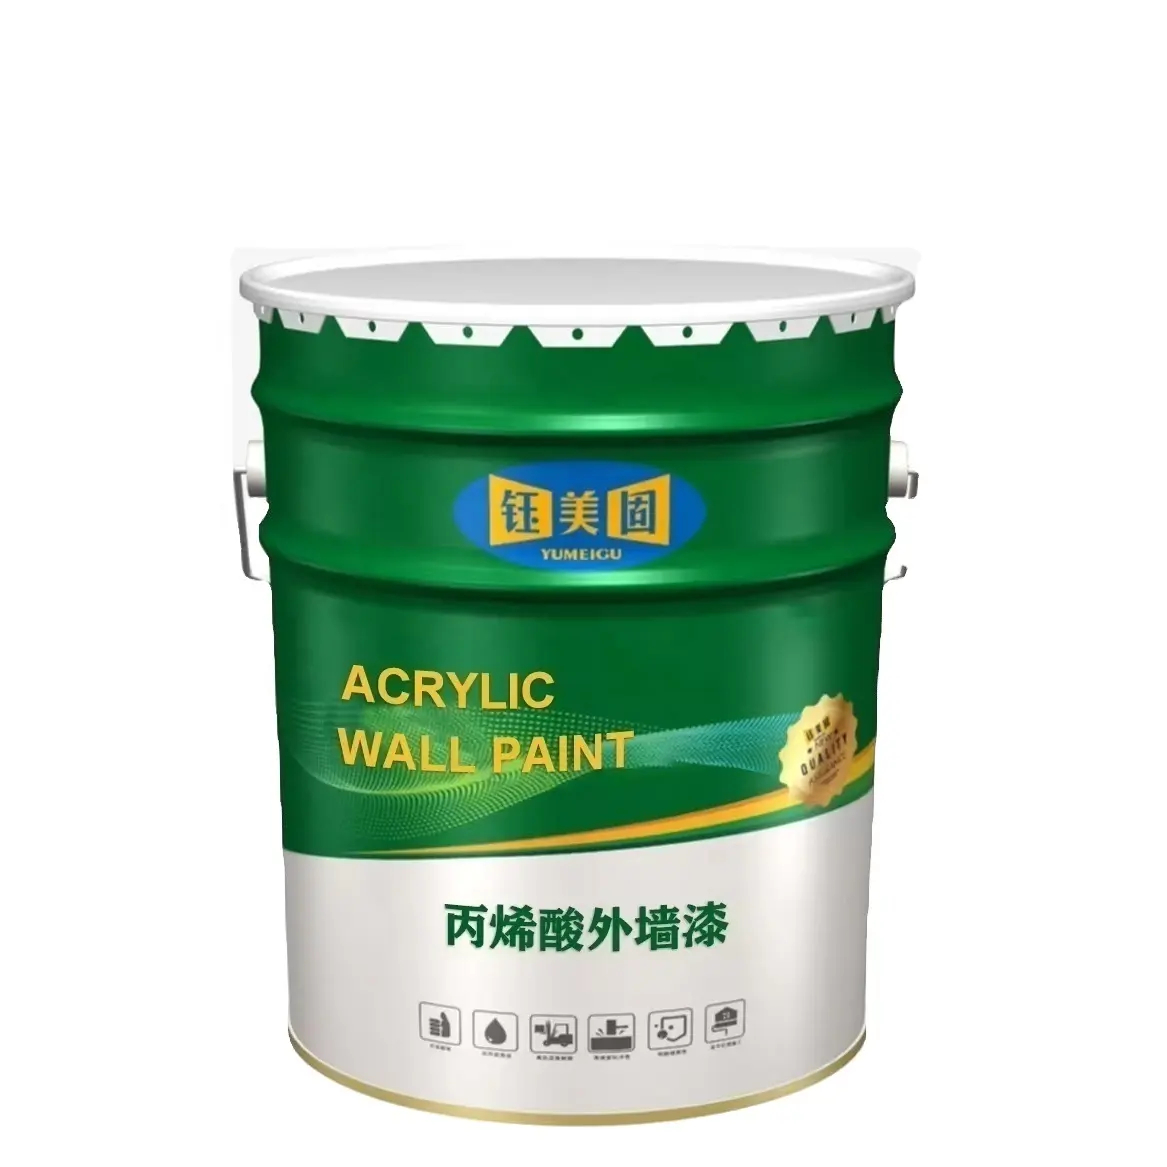 DS0020 Multi-Color Acrylic Wall Paint Liquid Coating Application with Brush